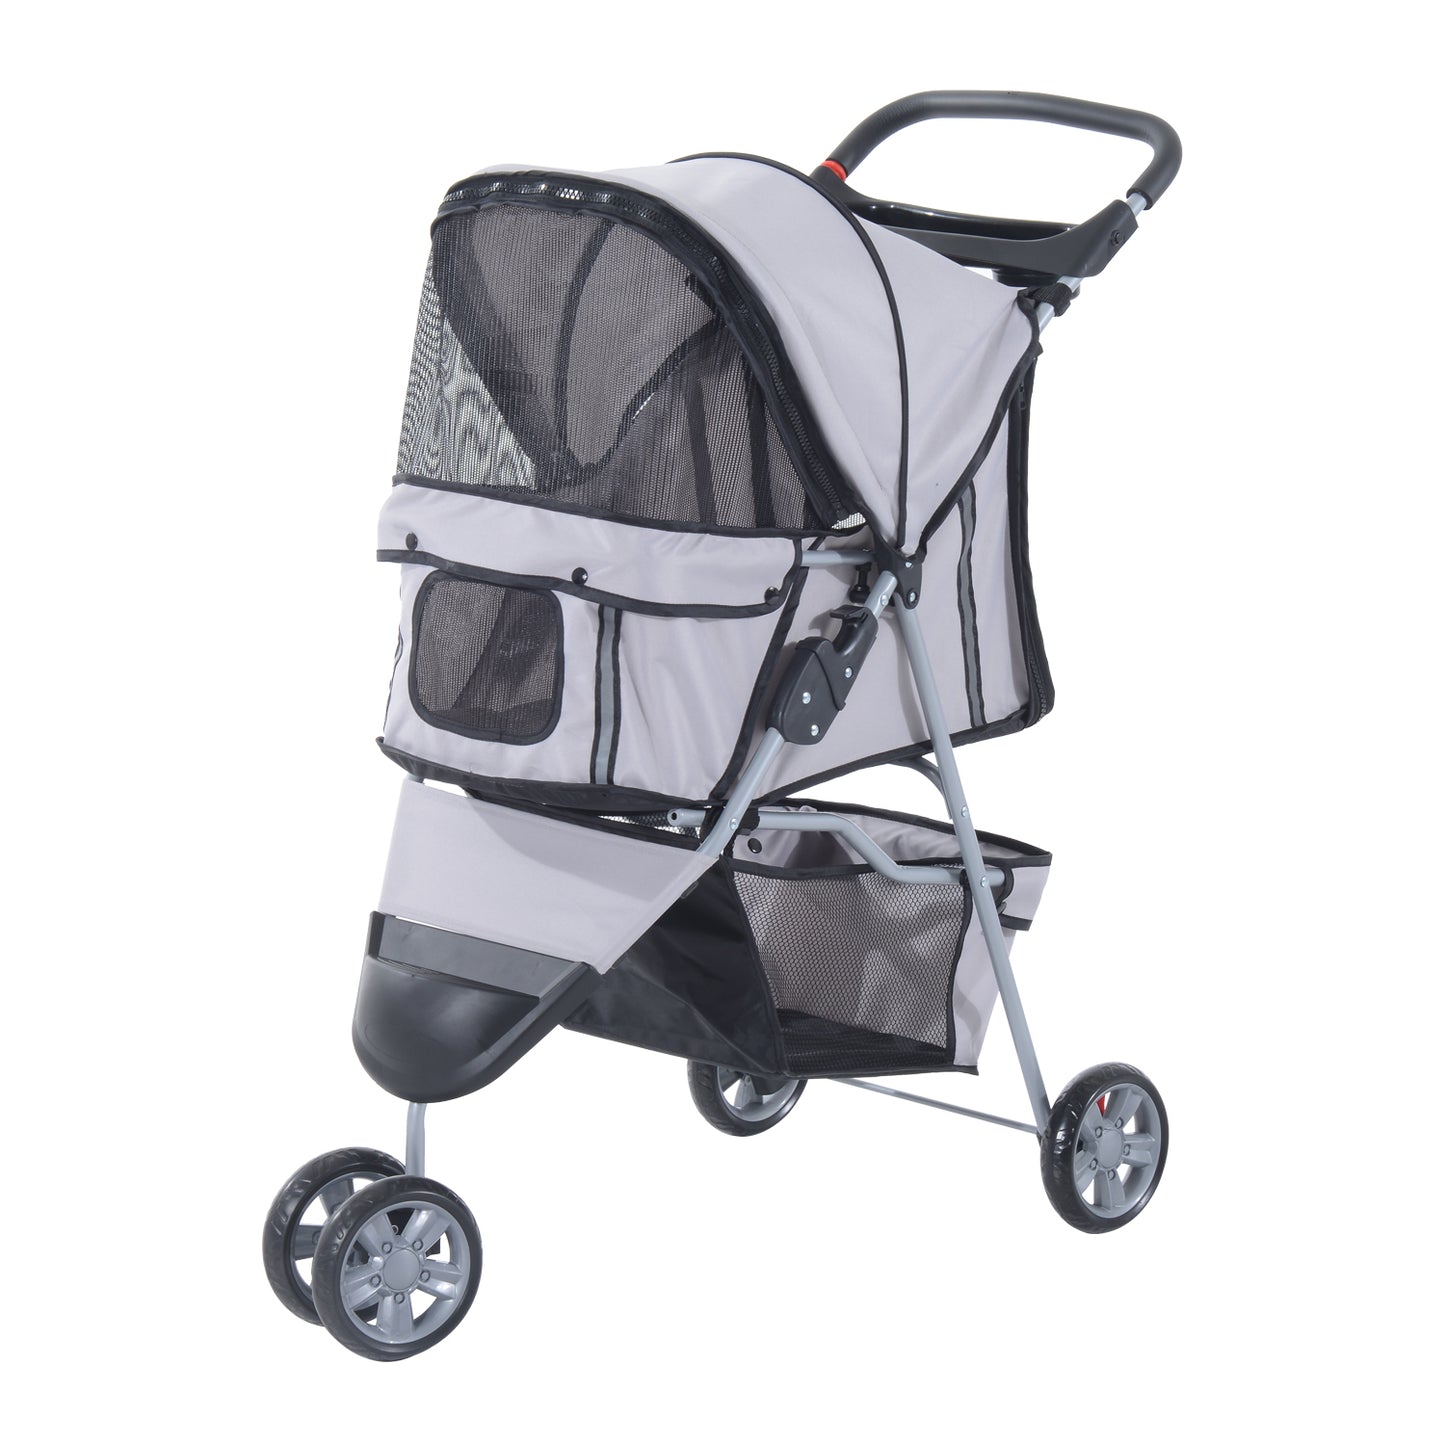 PawHut Dogs Oxford Cloth Three Wheel Pram Grey - Suitable for Small Pets